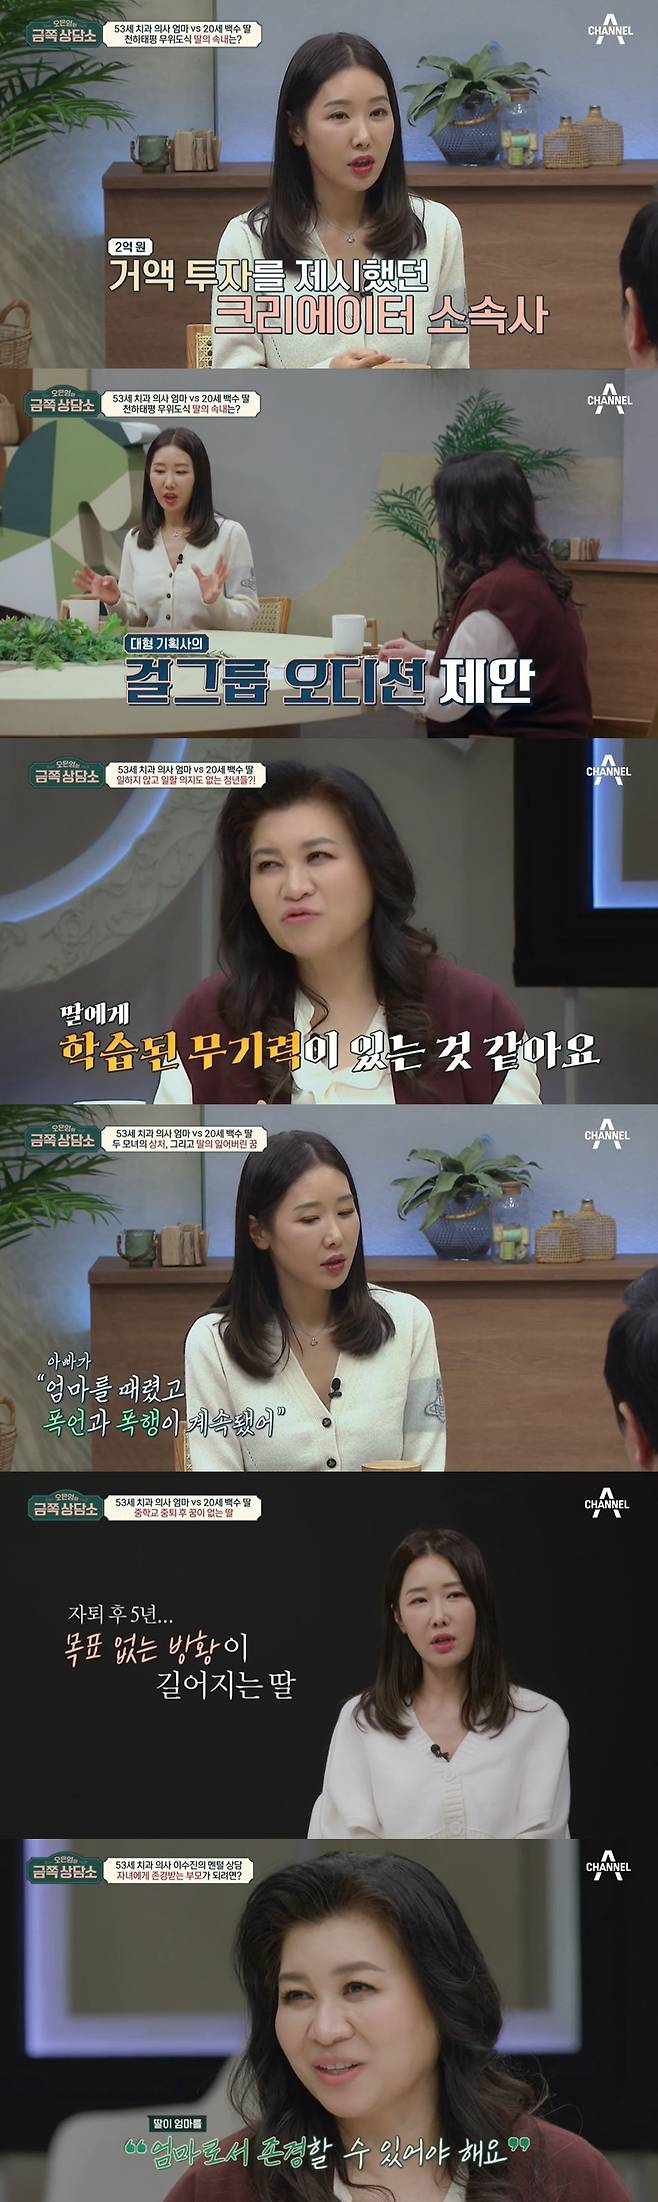 During the age of 53, influenza and dentist Lee Su-jin confessed to her concerns about her knit daughter and her ex-husband and reasons for her divorce.Channel A Oh Eun Youngs Golden Counseling Center, which was broadcast on January 14, was featured by the S-born dentist and the strongest influenza Lee Su-jin.Lee Su-jin, who boasts a beauty that can not be believed to be in his 50s, said he had a problem with his daughter and said, I want my daughter to do something.She is a 20-year-old daughter, but she gives up college and does nothing in an unemployed state. My daughter quit studying when she was a middle school.My diligent daughter suddenly refused to go to school during junior high school, but I thought it was adolescence, but she expressed her willingness to drop out of school in the middle school school senior year.She was a daughter who seemed to be dignified and cool at the time, but she was worried that she was in a state of white water without any will even after a few years.I thought it was natural for my mother to receive the living expenses, but Tyler also saw it, I have a mother.I will jump in a second after my mothers death. Lee Su-jin said that the Nit (a young unemployed man who has no work and no will) and his kangaroo-state daughter have already missed many opportunities.In the second year of Middle School, a Creator agency was also showing up to invest 200 million dollars to grow her daughter into a Creator, but her daughter responded with a sour response.He also received a love call from a large agency that created a famous girl group, but he did not memorize the lyrics and was not motivated at all.Oh Eun Young saw her daughter Jenna as having learned helplessness.About the time of puberty, Lee Su-jin said, I was in the fourth grade of elementary school. He asked me about my father for the first time.I hit my mother, I couldnt stand it, and I was going on verbal abuse and assault, and I thought Id blame you for being a patient if I lived longer.I could not live like that, and it seemed worse to raise my daughter in a house where there was a lot of abuse and assault. But the over-the-top honesty was too much truth for an 11-year-old to handle.Also, when she decided to drop out, Lee Su-jin respected her daughters decision, but her daughter would have felt disappointed by her somewhat light mothers reaction.In addition, her daughter confessed that the situation in which the mother of the influenza shared her secrets to fans or saw a bikini photo of her mother who did not know her was shocking.Oh Eun Young said, I feel like I do not have much difference between the unspecified number I meet through SNS and the only daughter.In the meantime, because I have never experienced my mothers love, Lee Su-jins role seems to have stayed in a friend, not a mother. It seems important for my daughter to respect her mother.I have to respect you as a mother who protects me, loves me, cares most and discusses the future, not because I have a lot of money and a lot of positions. 